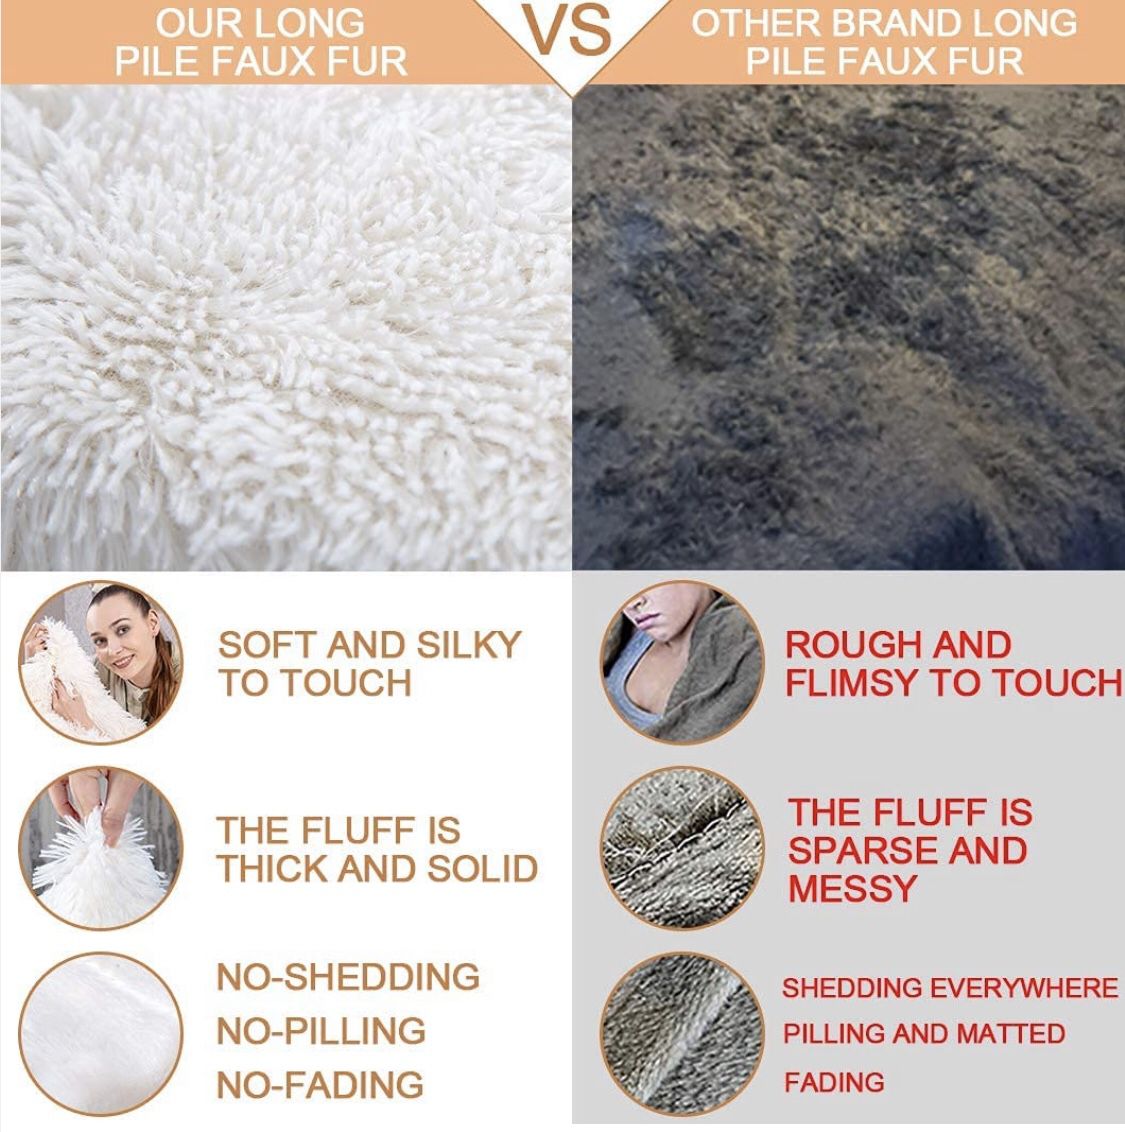 Thick Twin Size Faux Fur Throw Blanket(Cream White,60" x 80"),Whithout Pillows,Winter Lightweight Plush Fuzzy Soft Cozy Microfiber Comfy Bed Blanket f